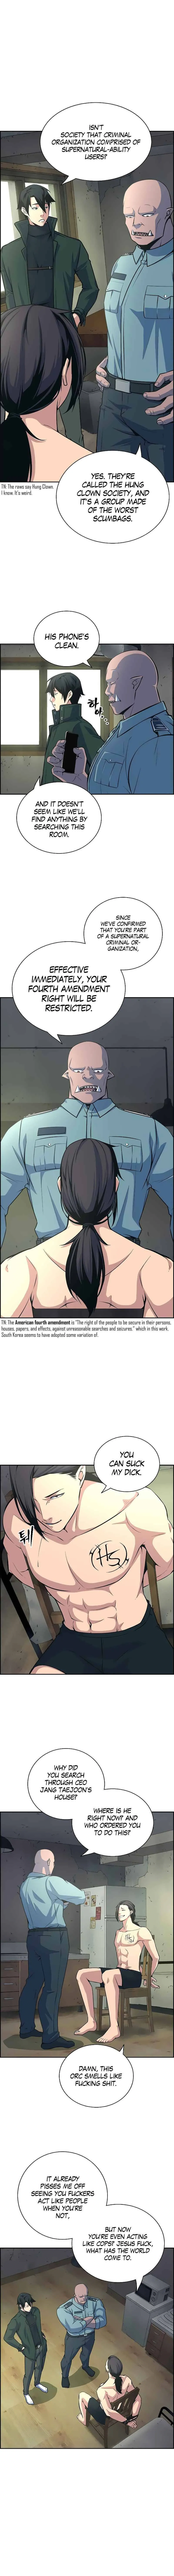 Foreigner on the Periphery Chapter 5 page 8